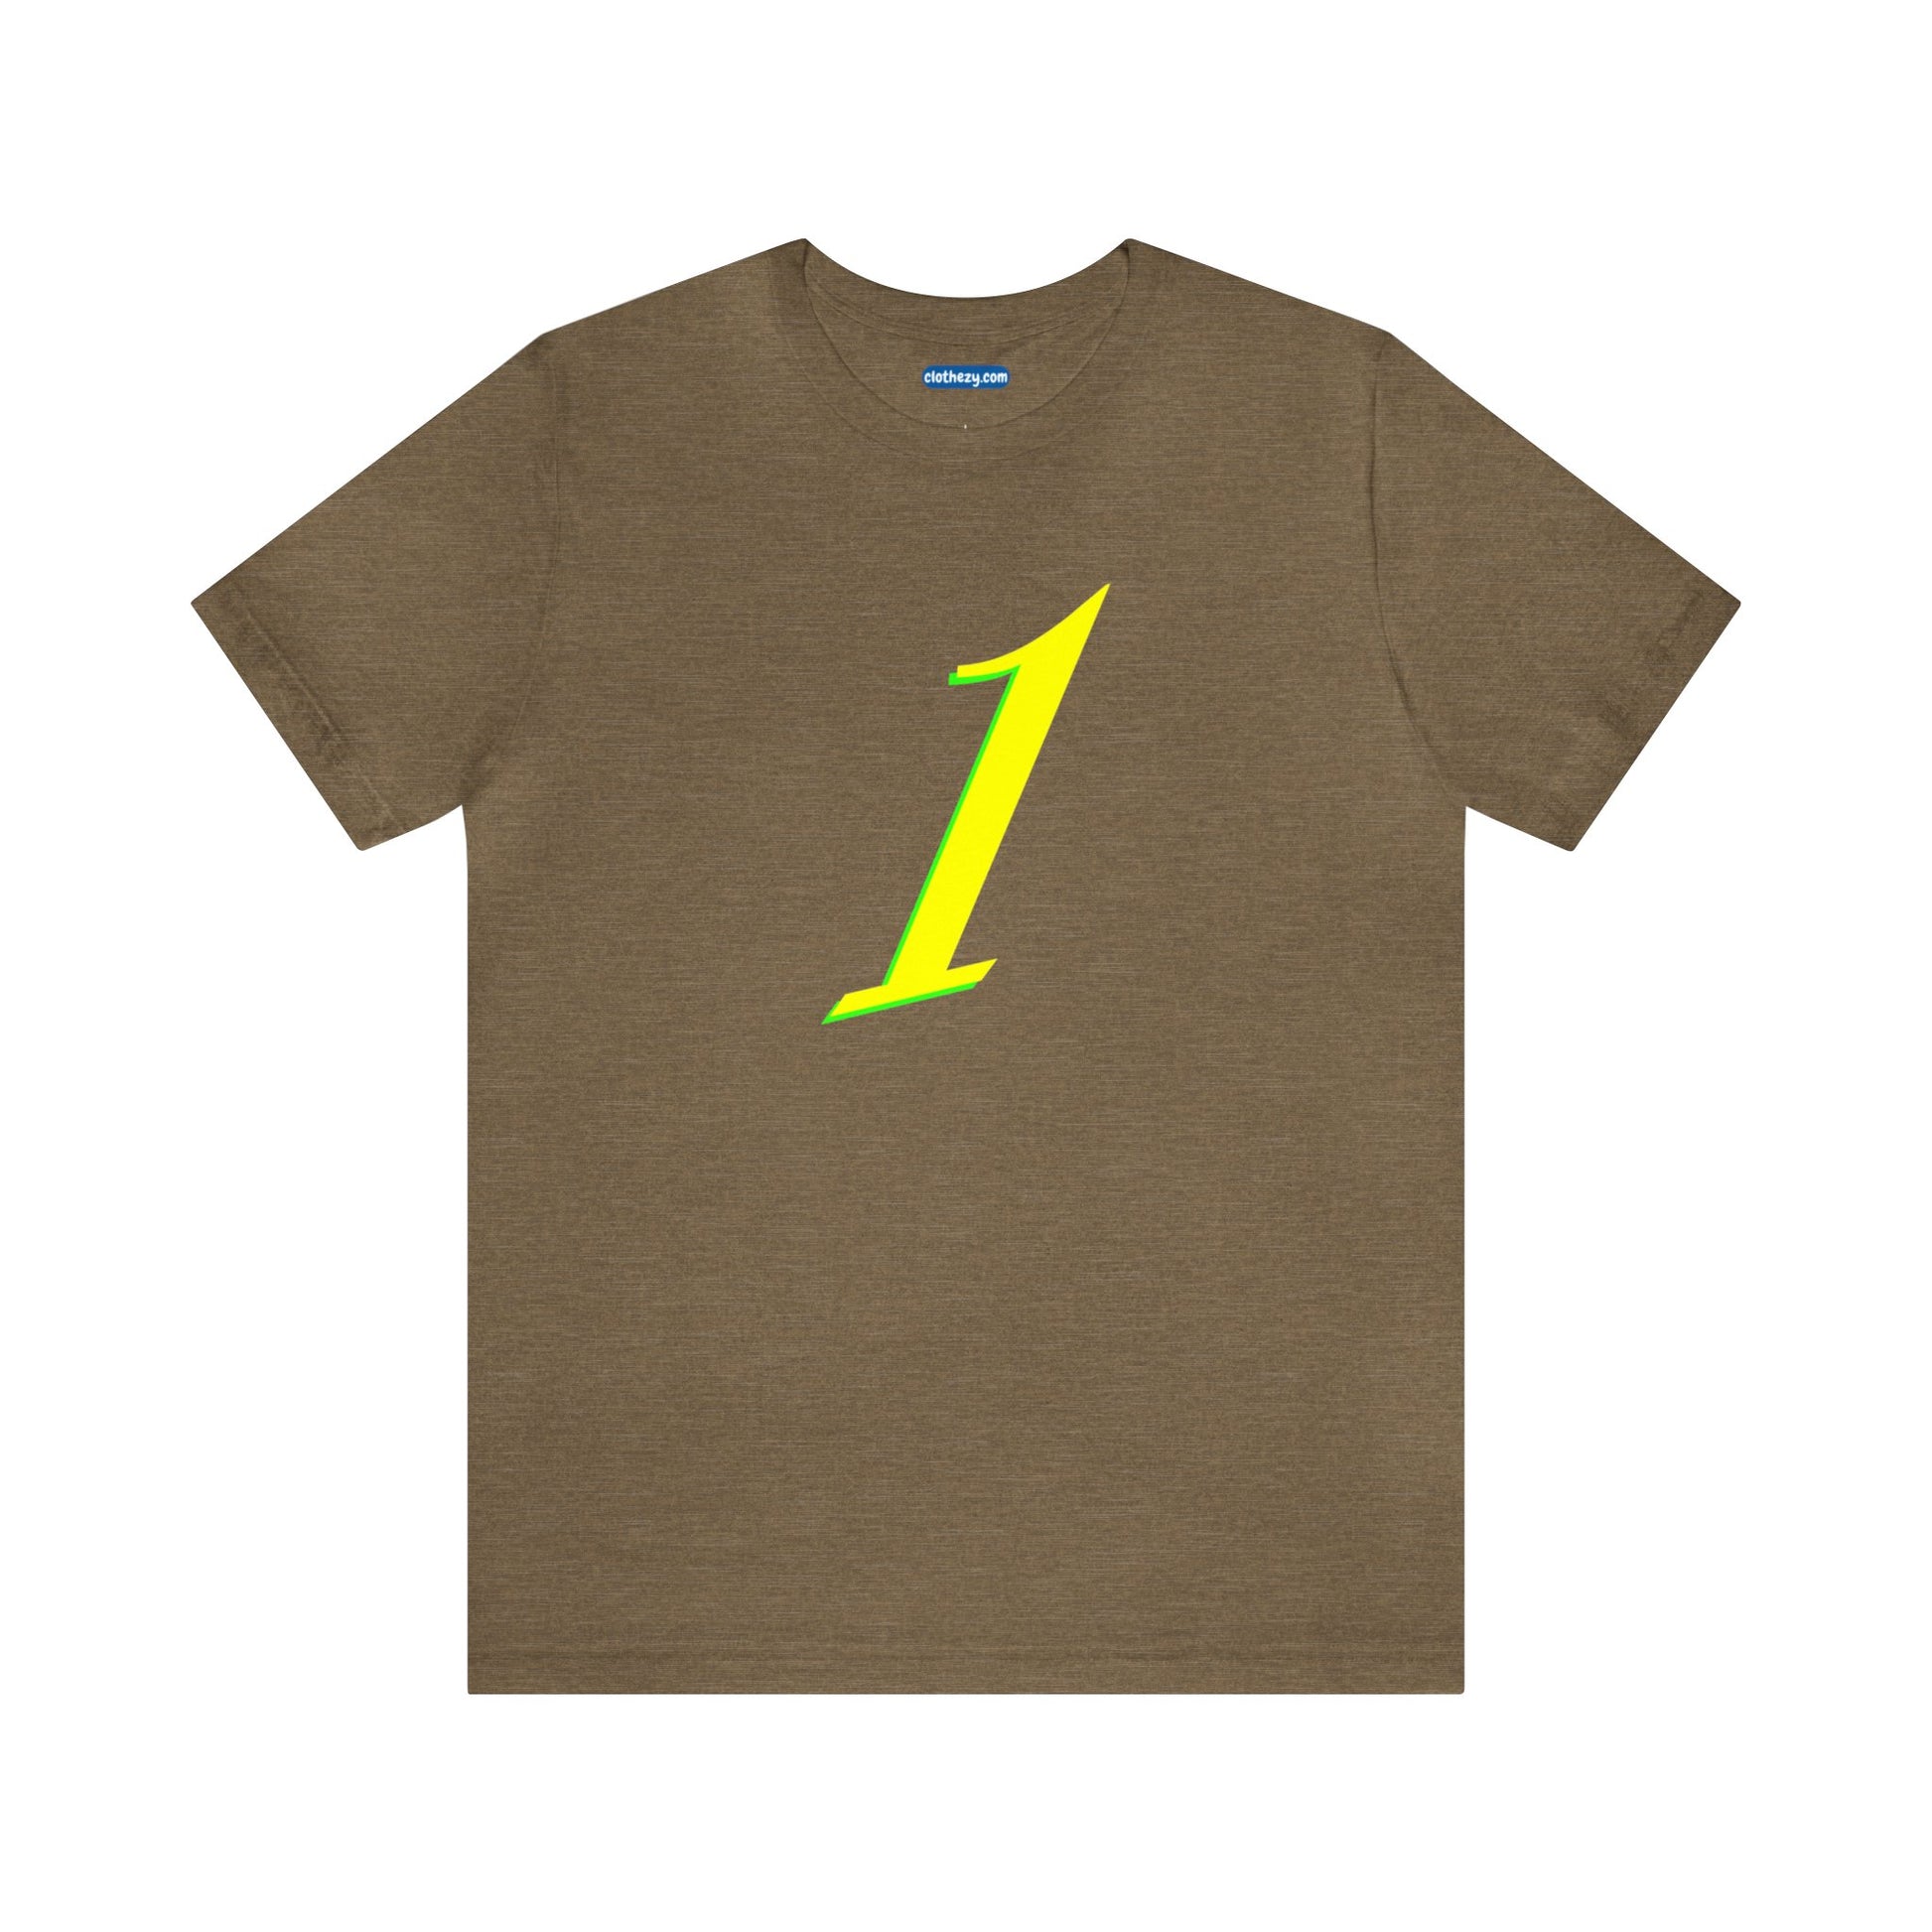 Number 1 Design - Soft Cotton Tee for birthdays and celebrations, Gift for friends and family, Multiple Options by clothezy.com in Olive Heather Size Small - Buy Now